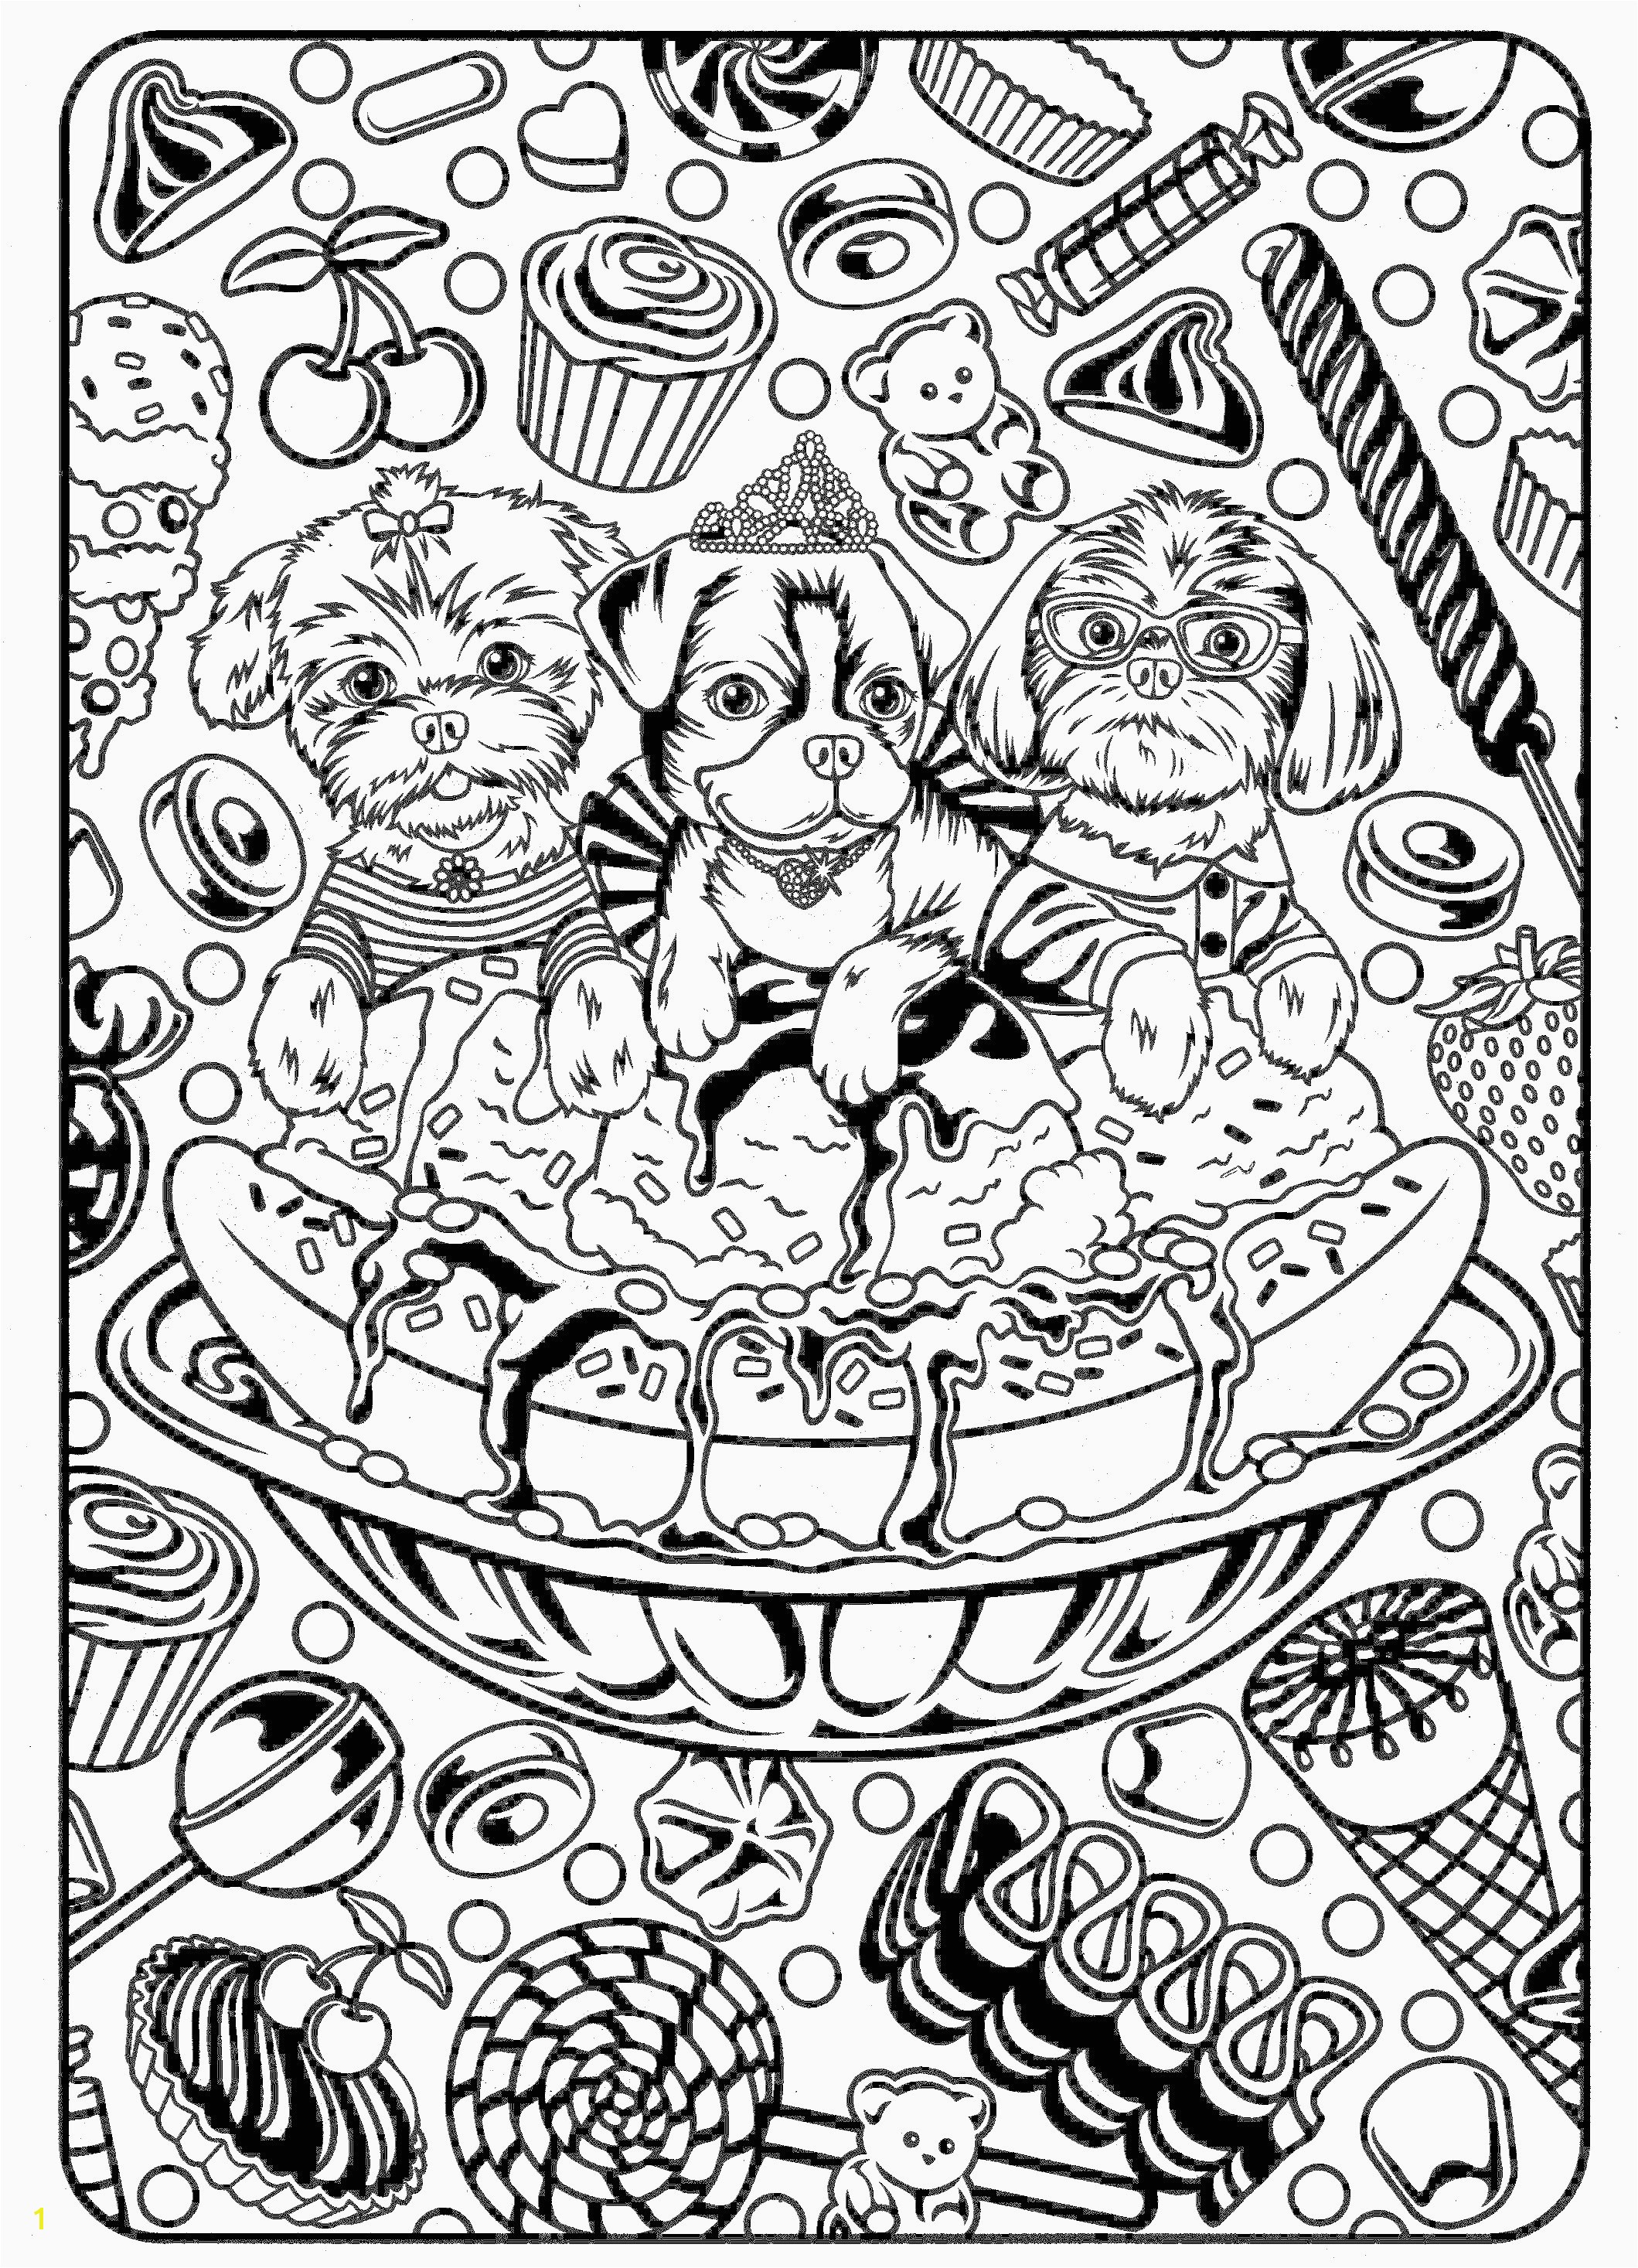 Tortoise and the Hare Coloring Page 14 Unique tortoise and the Hare Coloring Page S